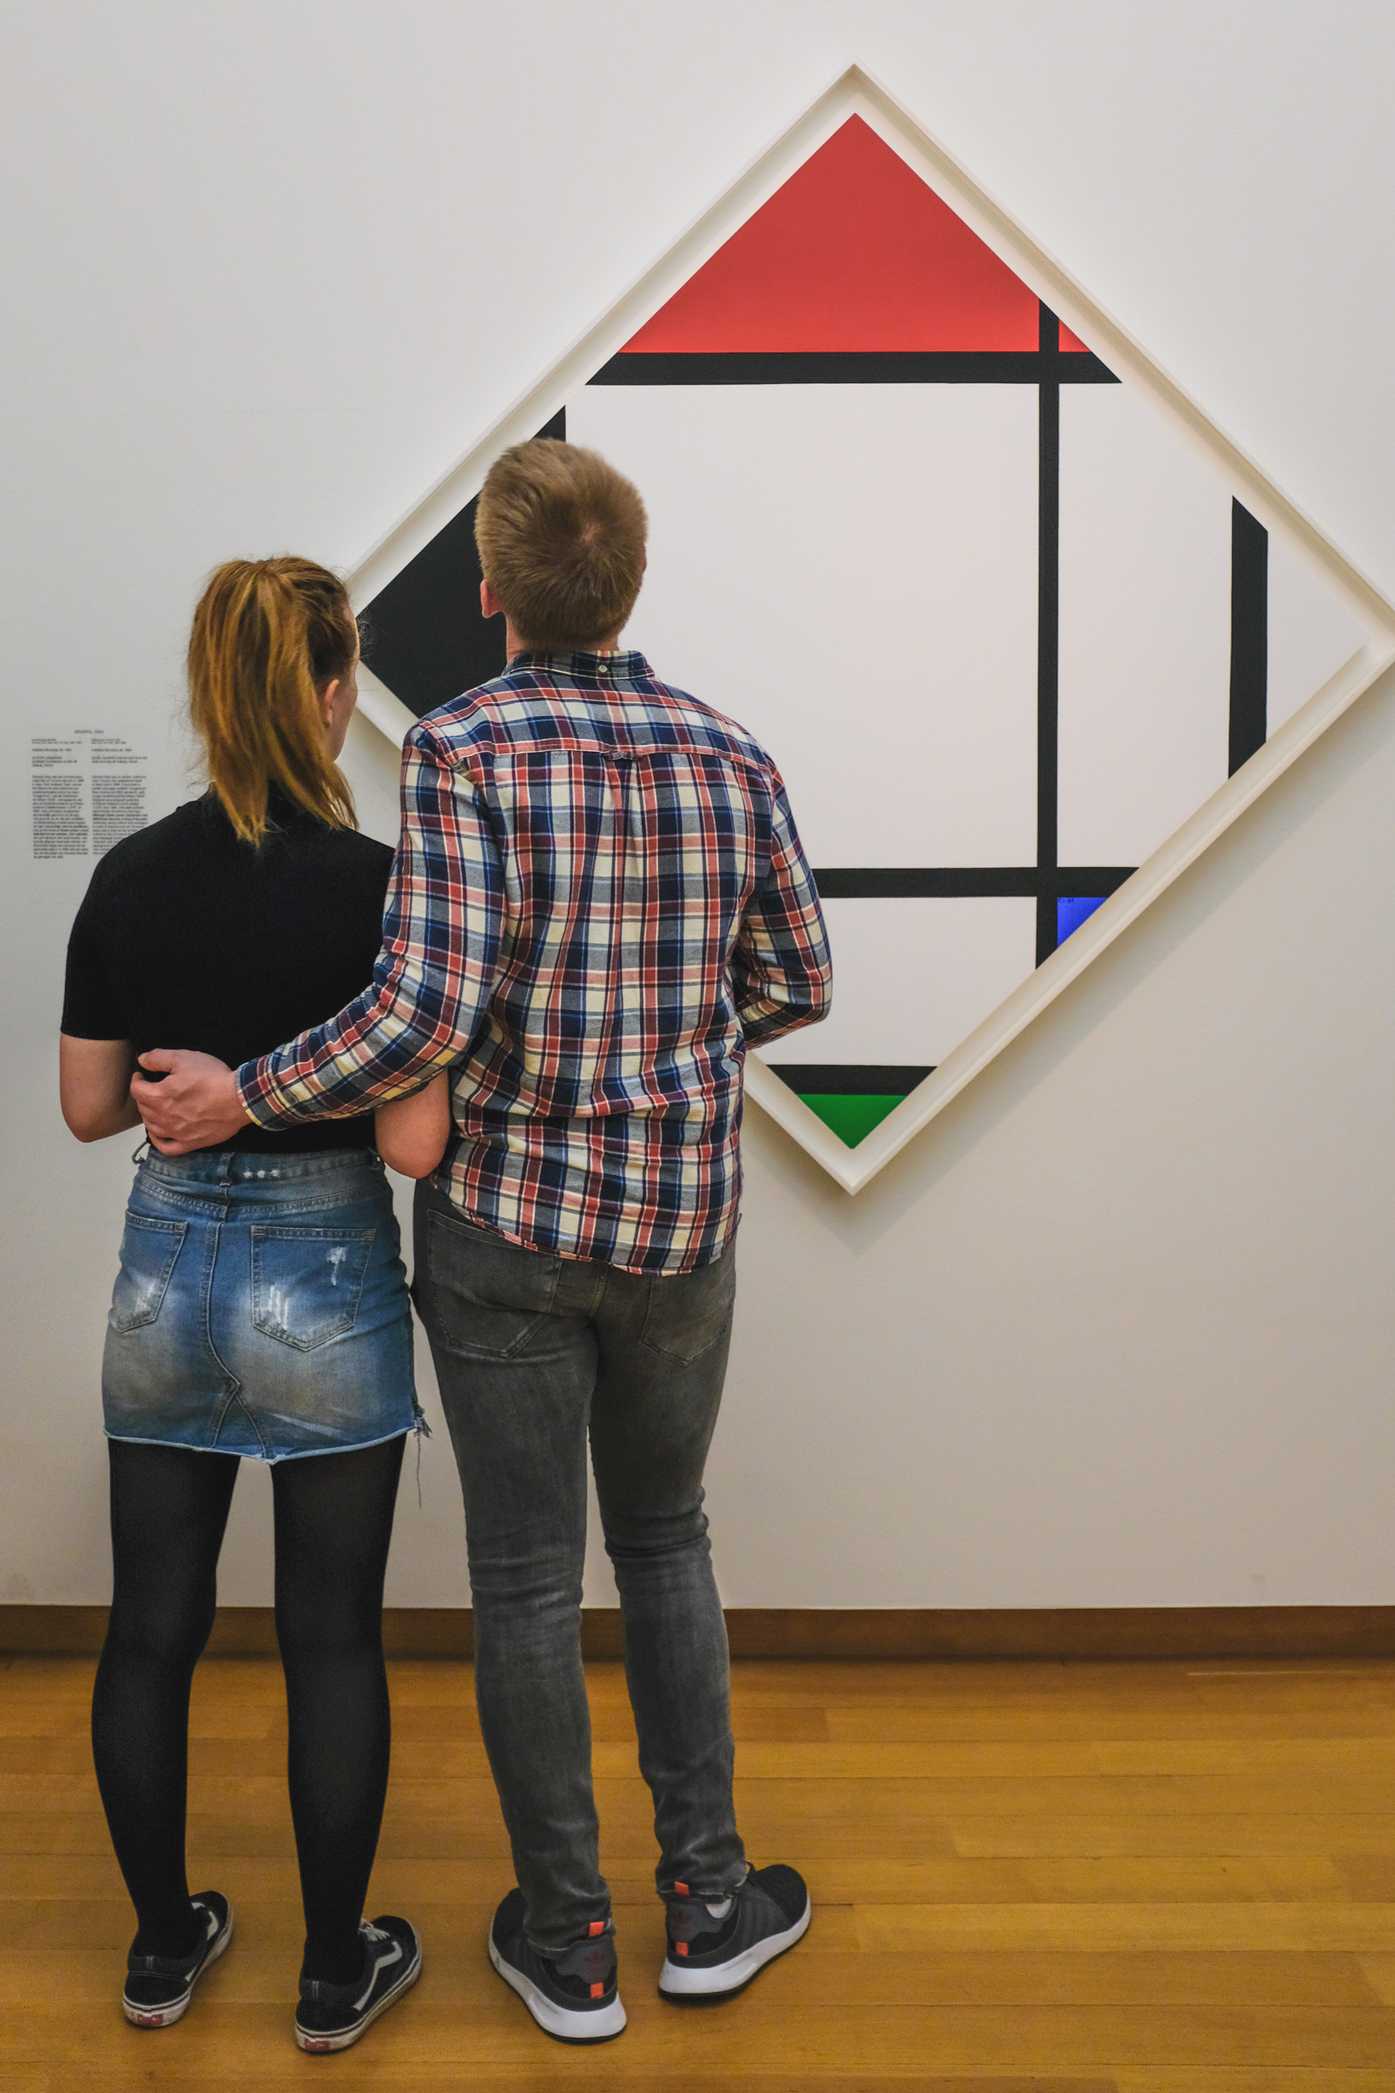 A young couple looks at painting from the art movement De Stijl